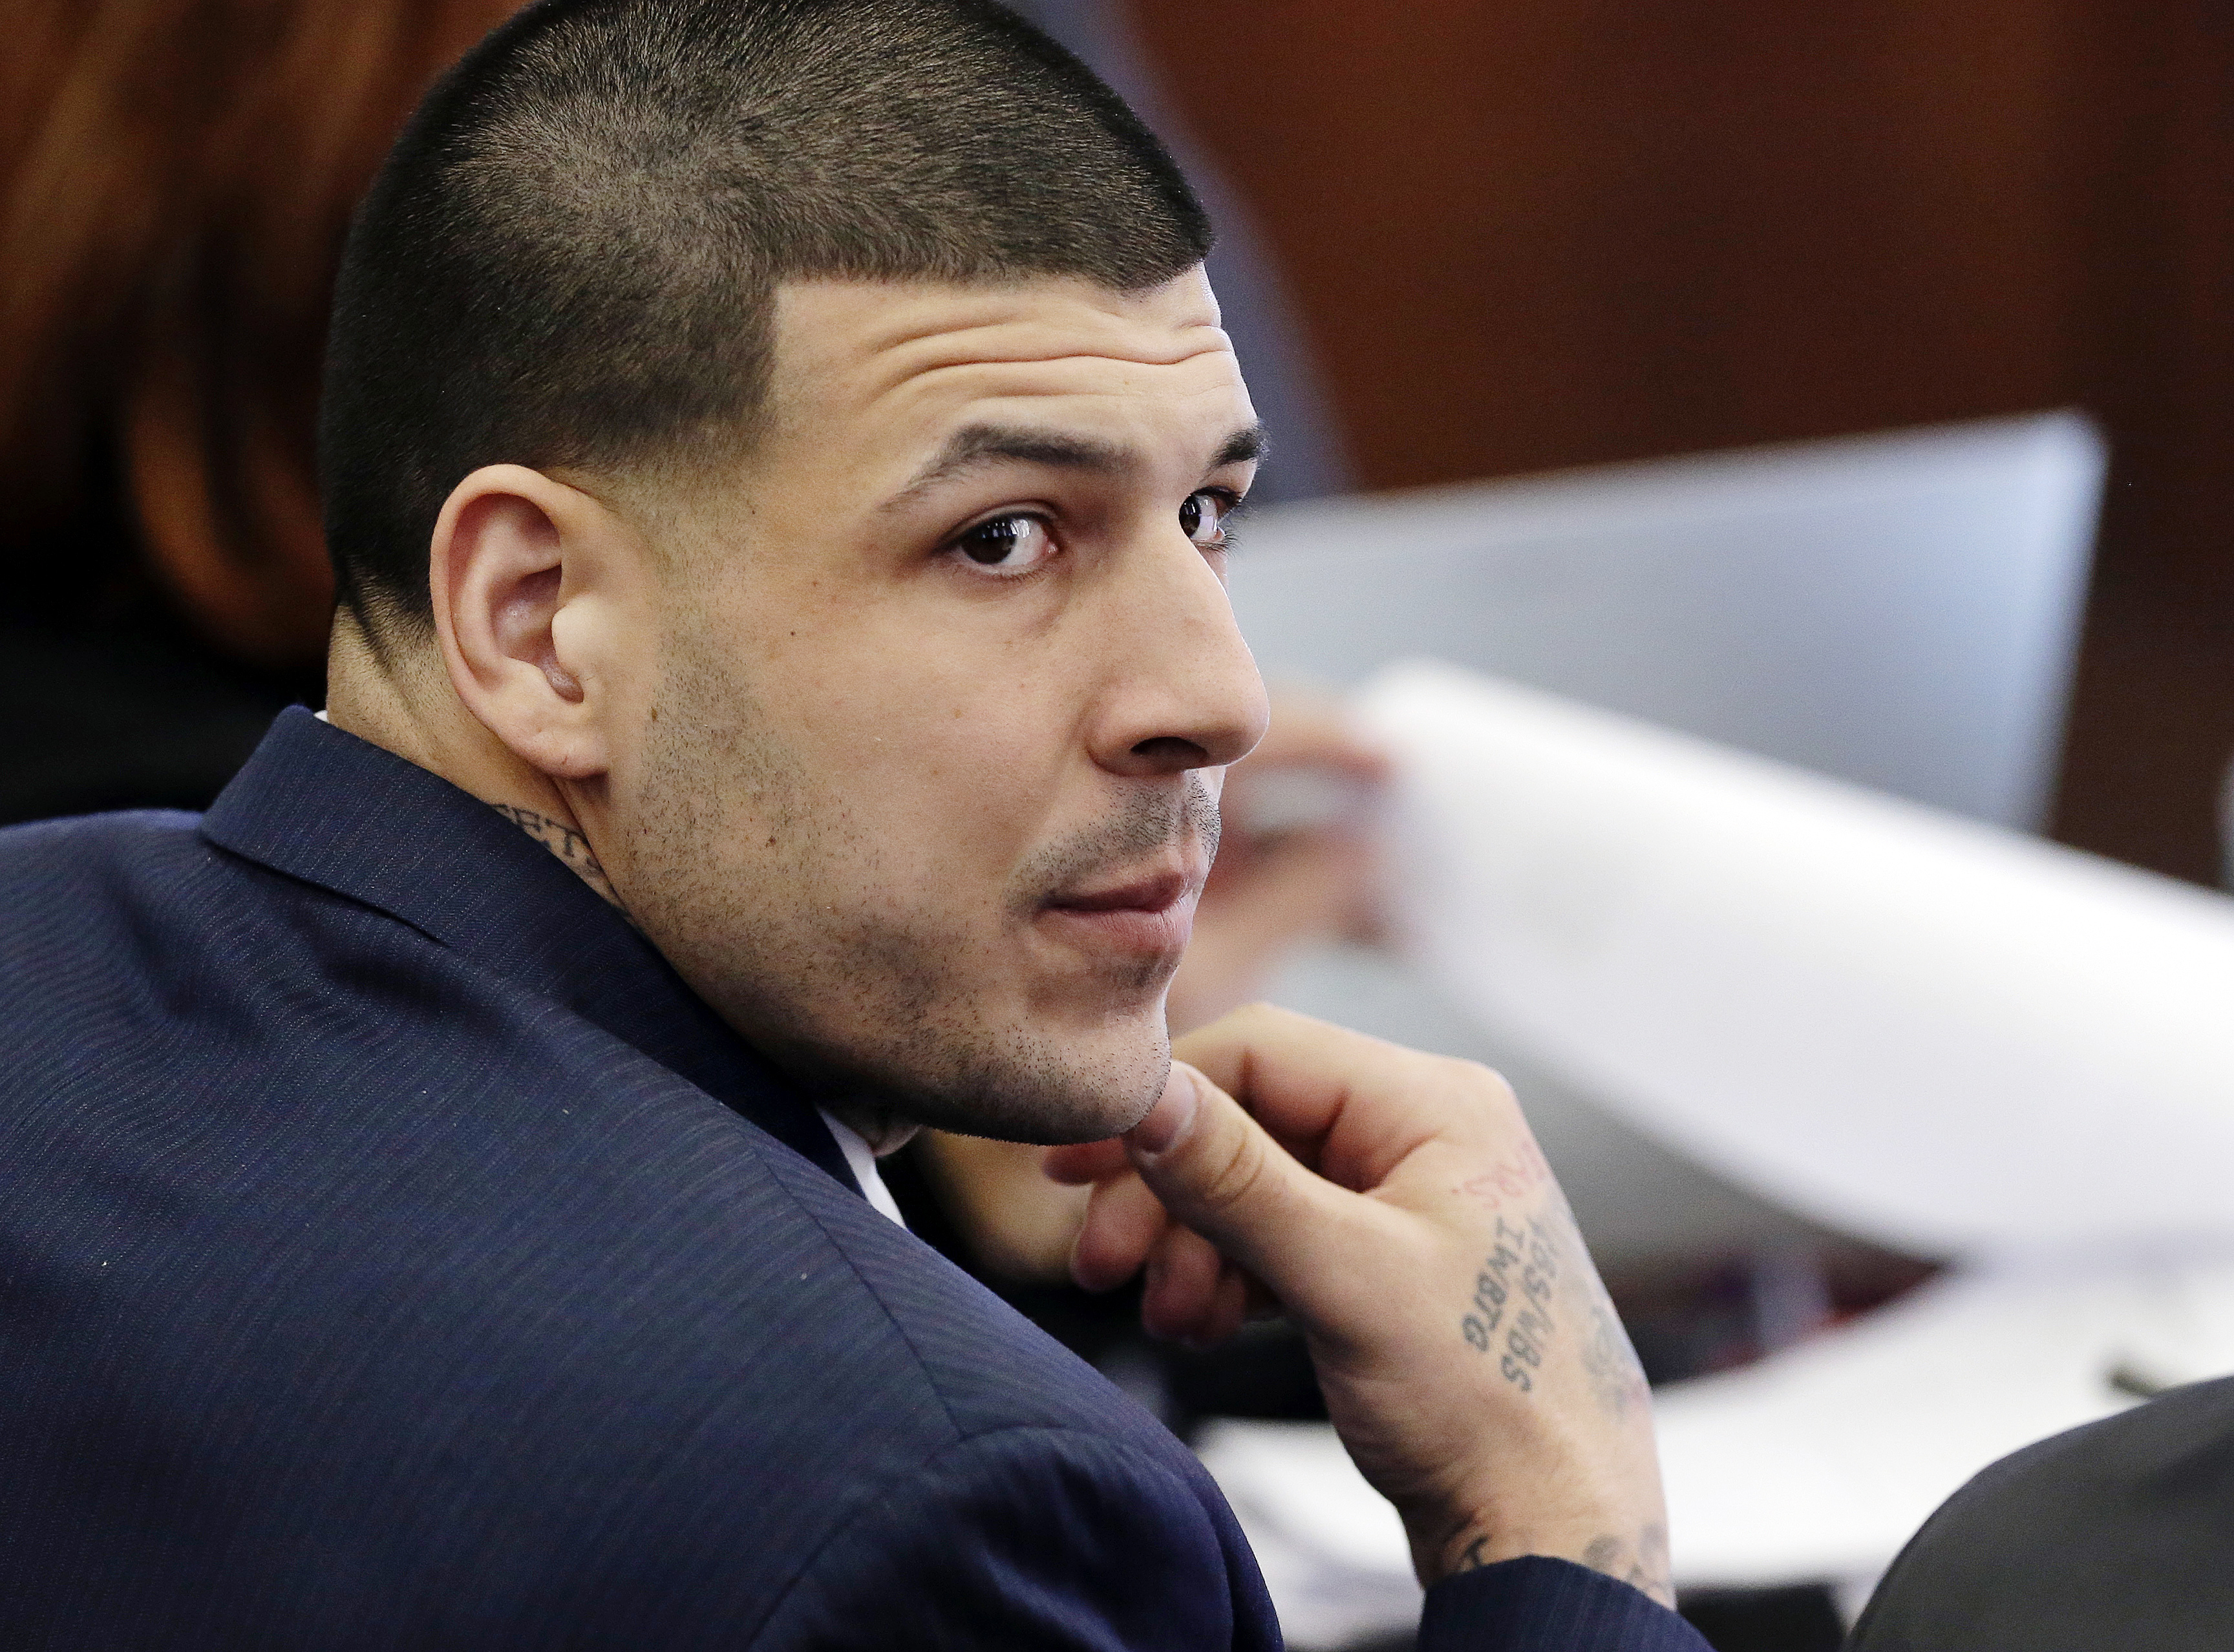 FILE - In this Wednesday, March 15, 2017, file photo, Defendant Aaron Hernandez listens during his double murder trial in Suffolk Superior Court, in Boston. Massachusetts prison officials said Hernandez hanged himself in his cell and pronounced dead at a hospital early Wednesday, April 19, 2017. (AP Photo/Elise Amendola, Pool, File)